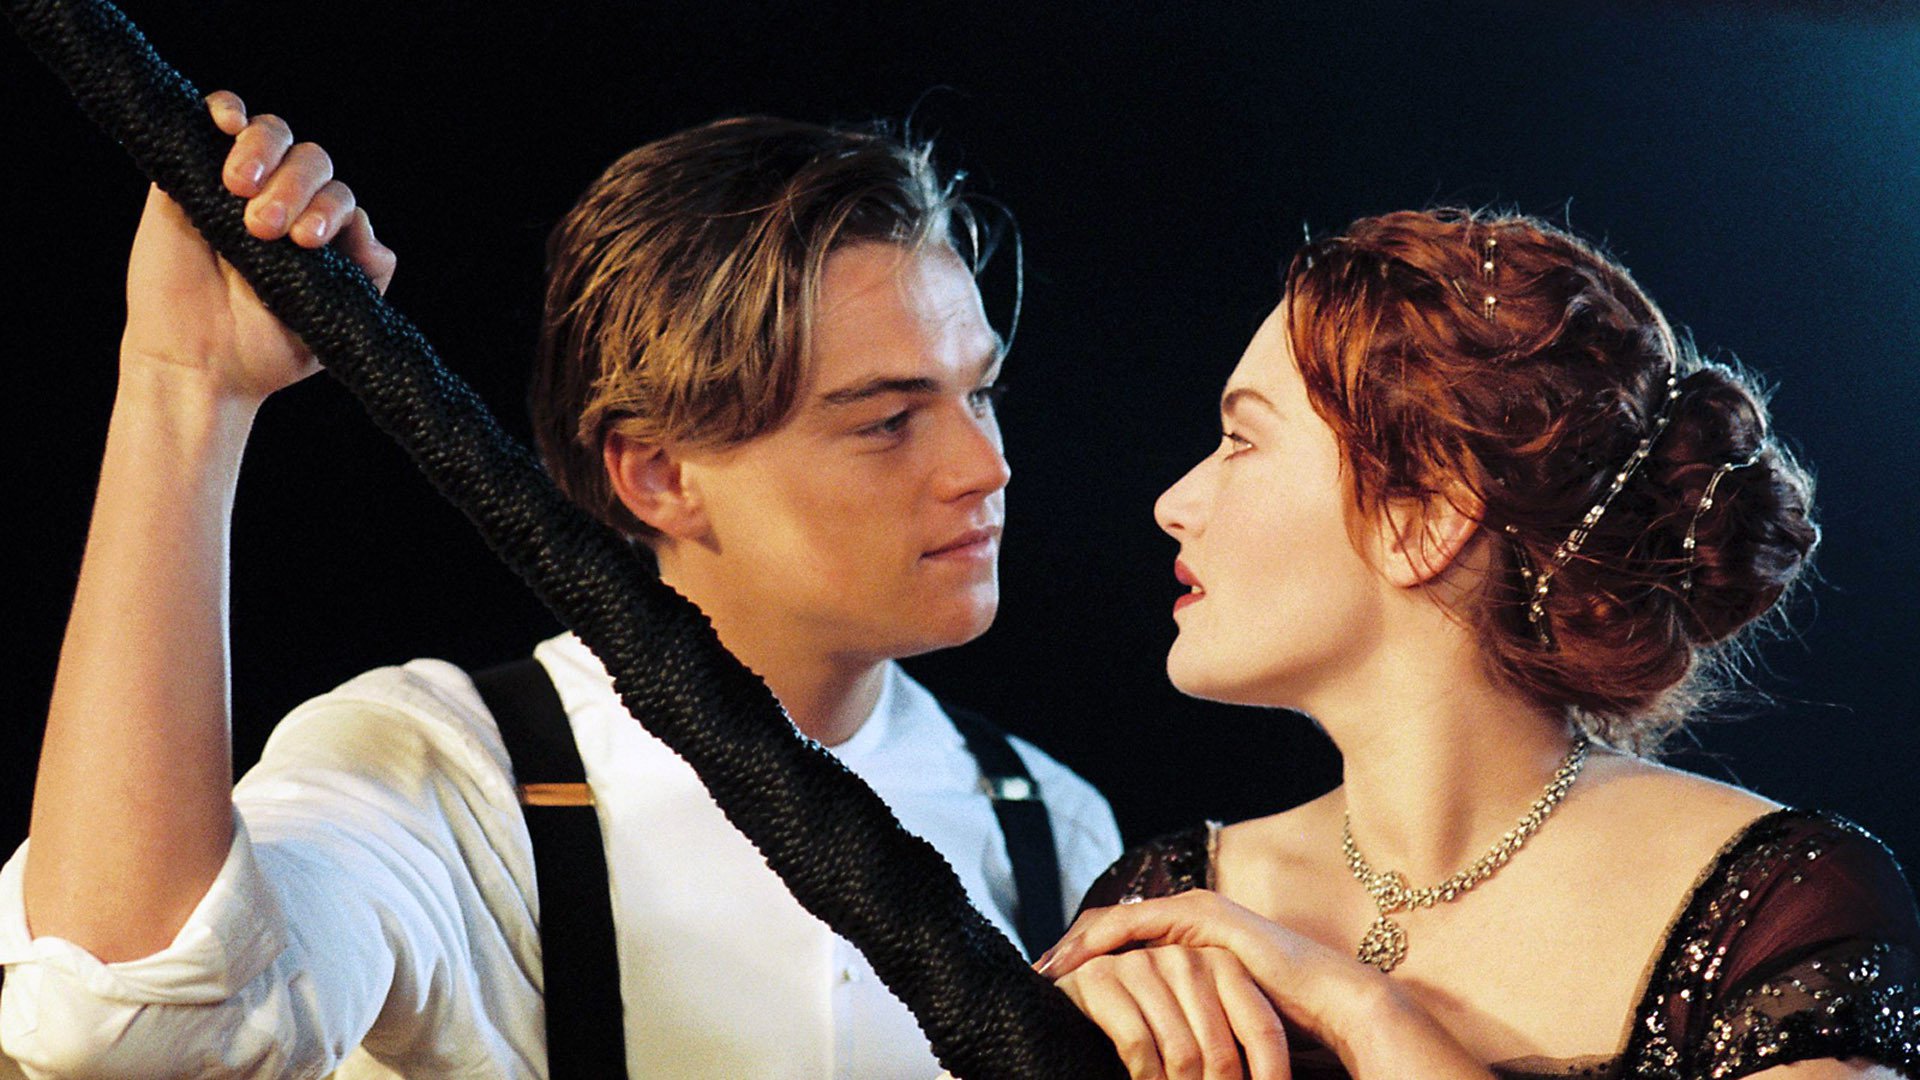 ‘Kissing Leonardo DiCaprio in Titanic was an absolute nightmare, a disastrous mess’: Kate Winslet reveals behind-the-scenes story from the set of the famous film